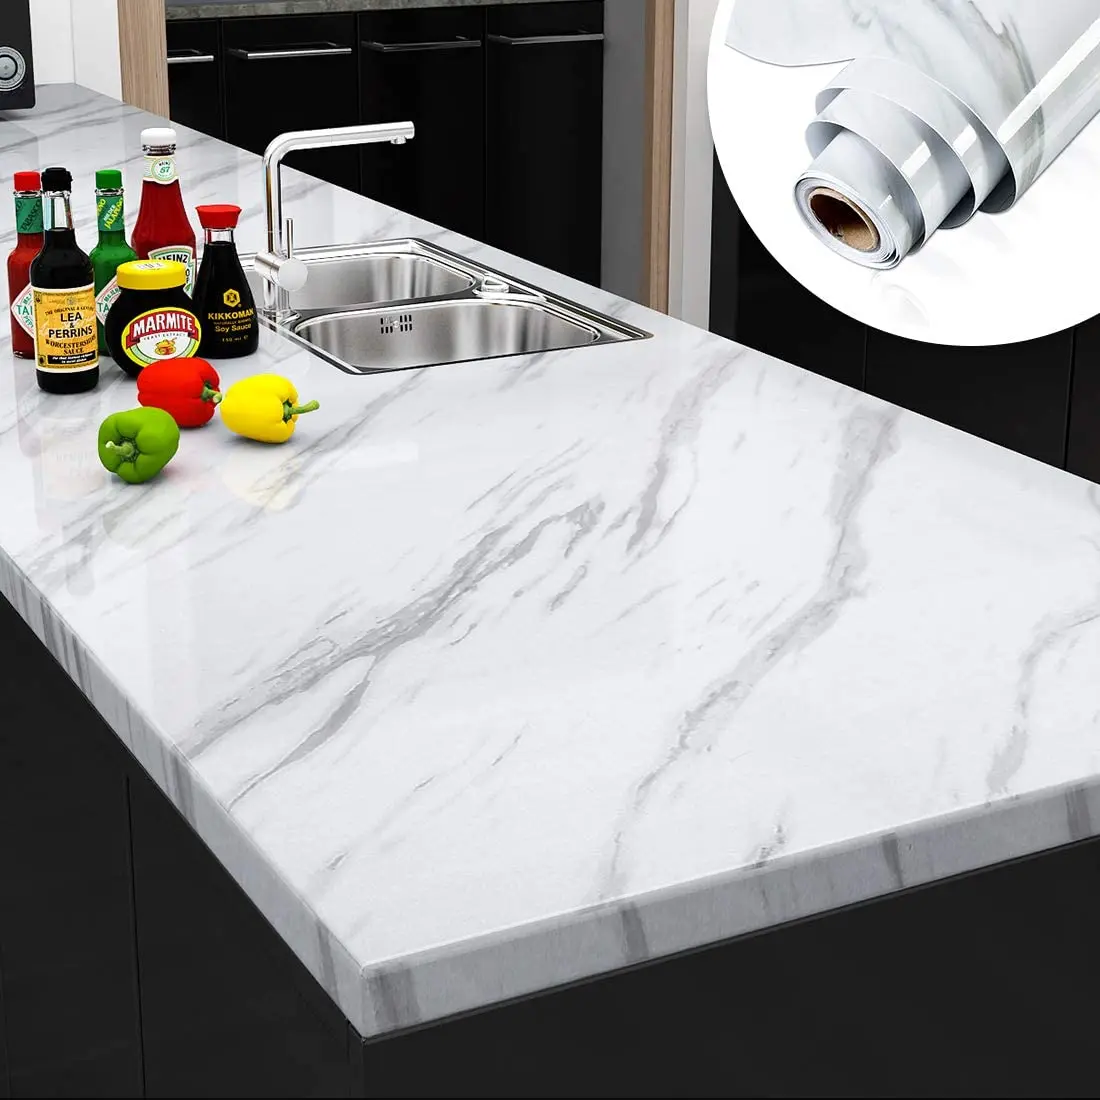 

60cmx10M Home PVC Self-Adhesive Marble Wall Sticker Waterproof and Oilproof Kitchen Bedroom Bathroom Table Countertop Wallpapers